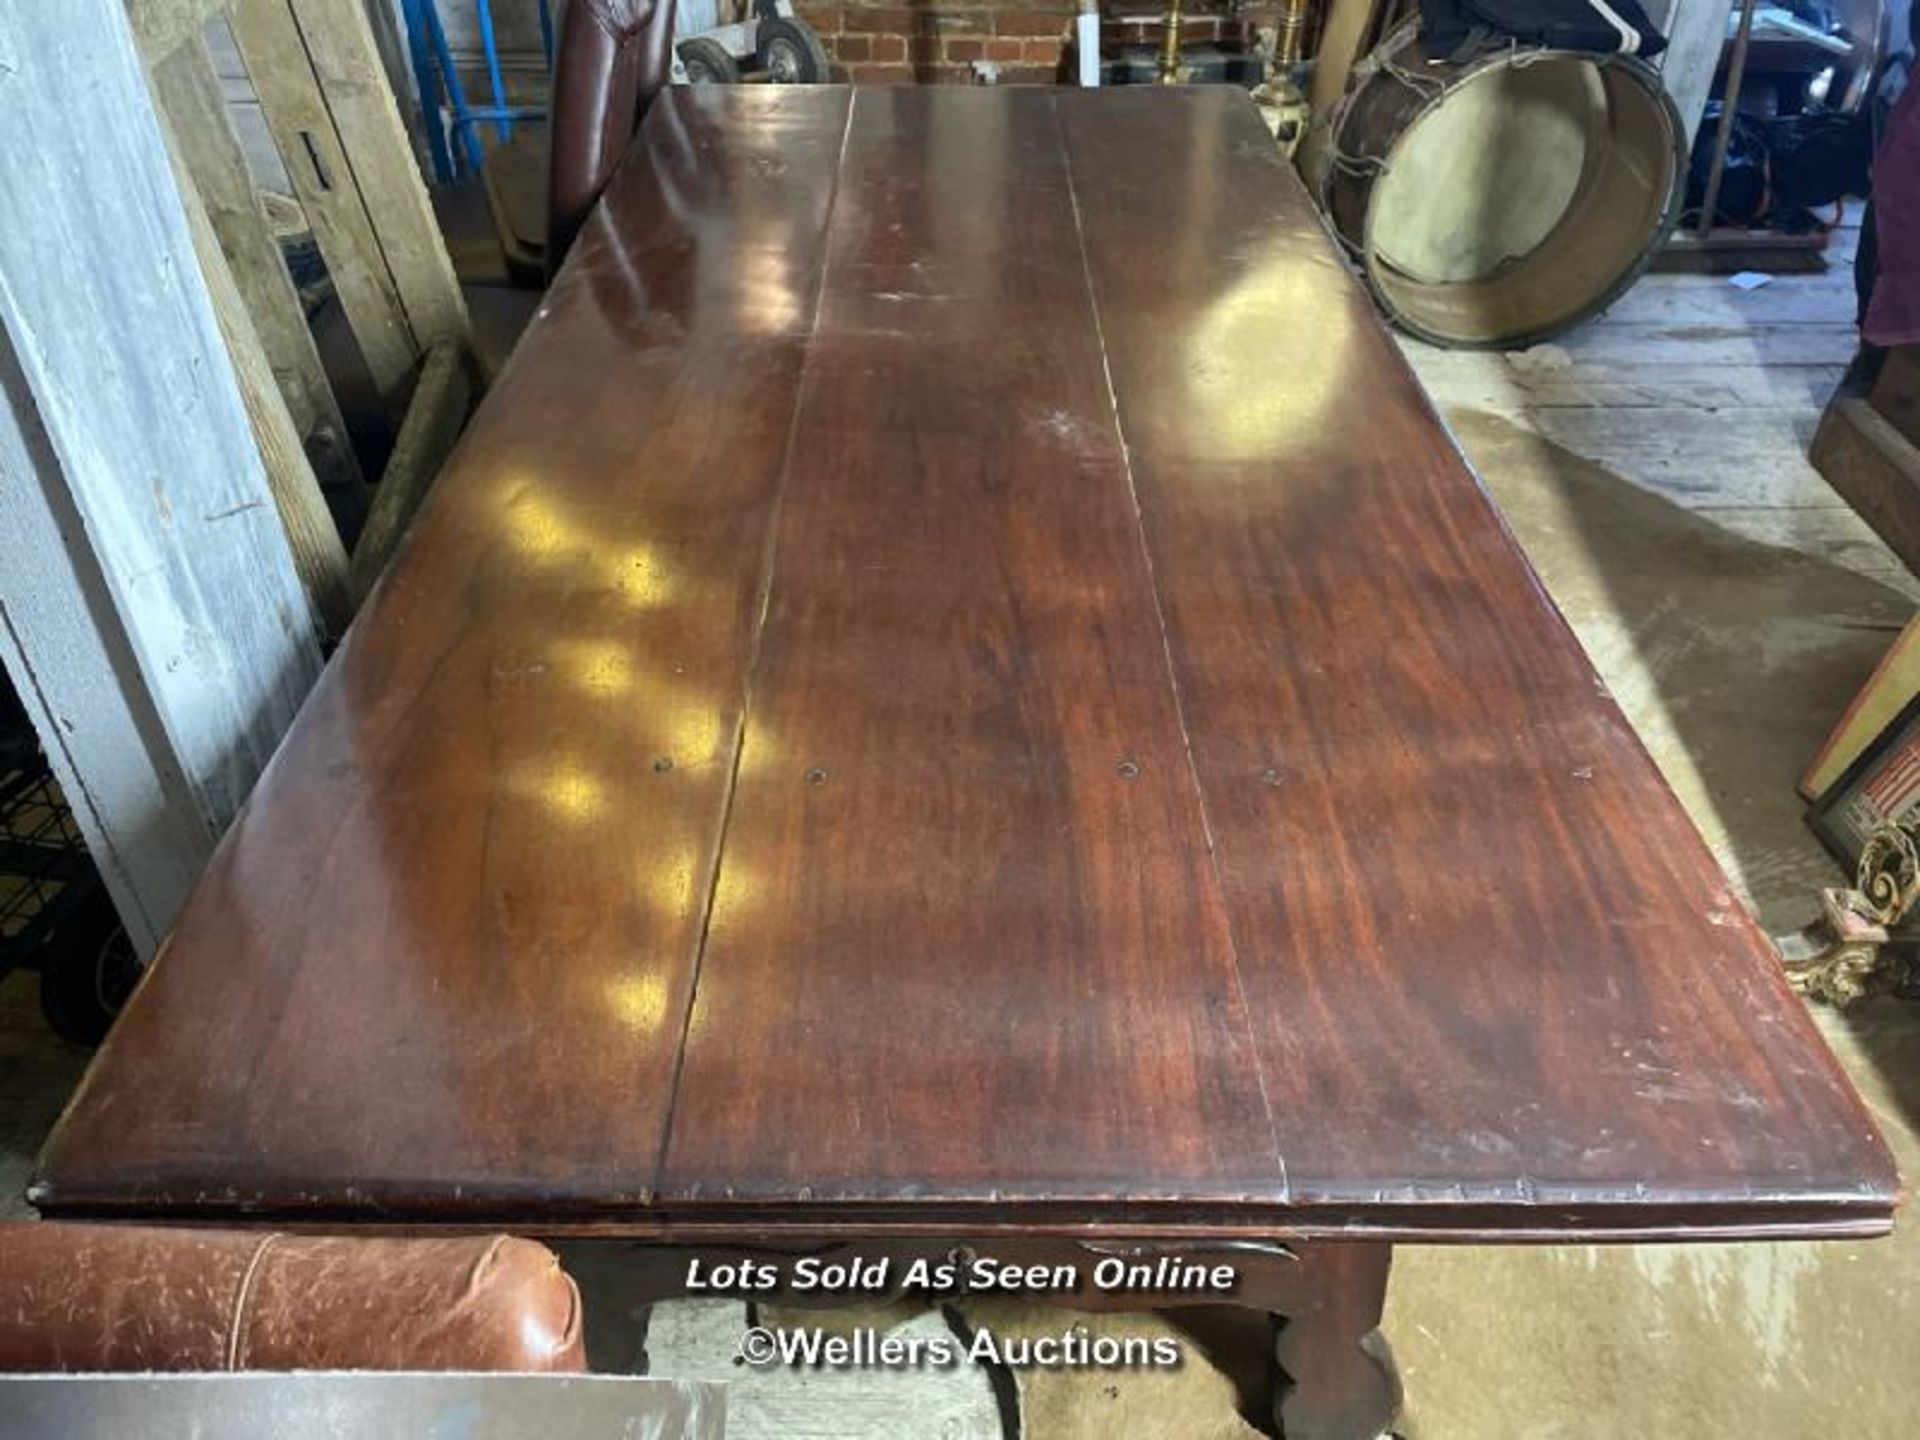 AN 18TH CENTURY STYLE SPANISH REFECTORY TABLE IN FRUITWOOD, 204 X 83 X 77CM - Image 5 of 6